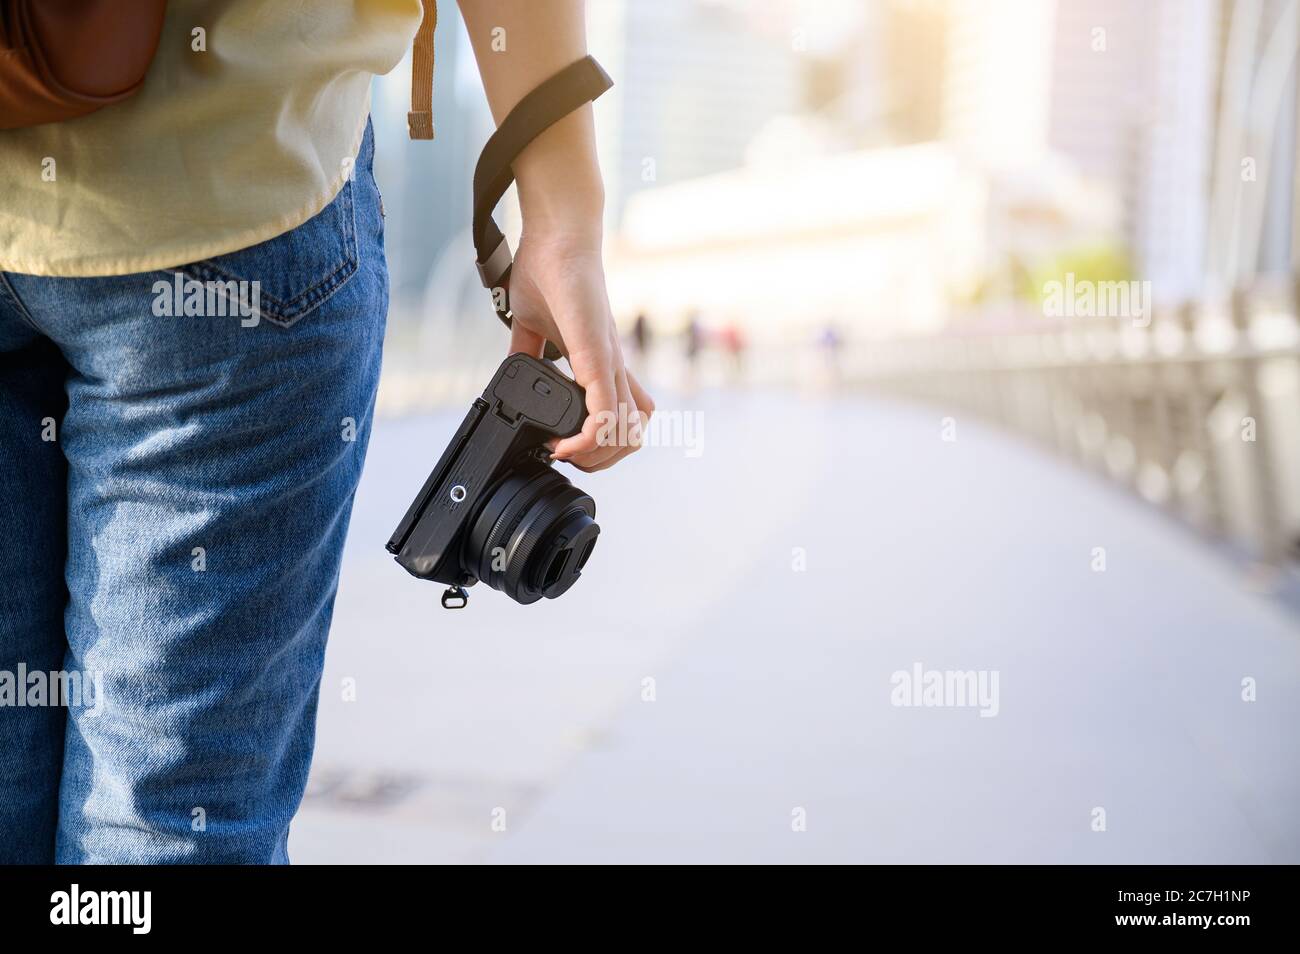 Photographer and traveler concept, Woman holding the digital camera while traveling in Singapore city Stock Photo